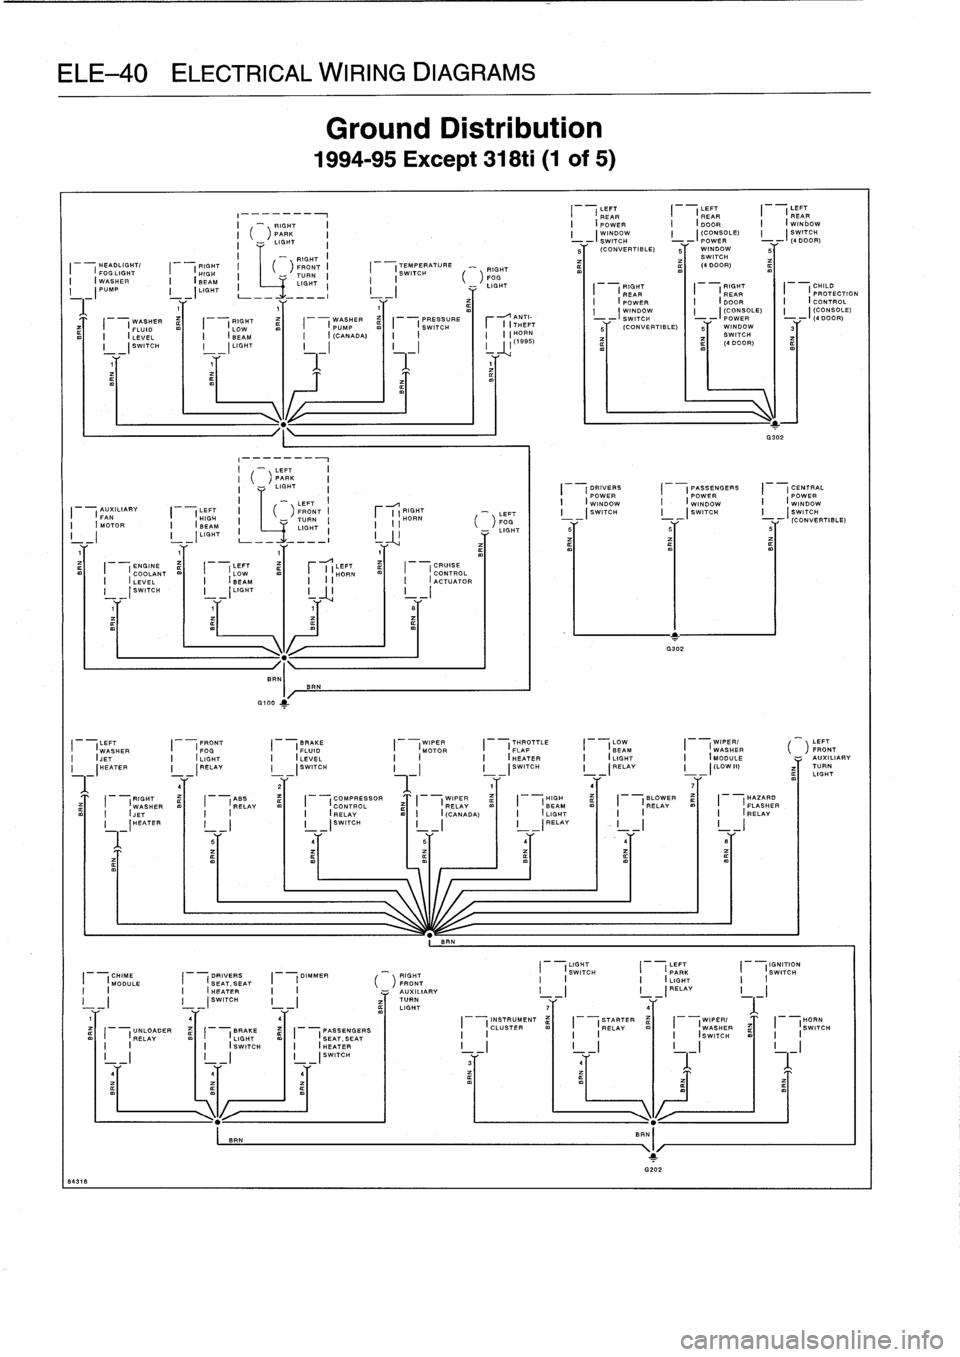 BMW 328i 1997 E36 Workshop Manual 
ELE-40
ELECTRICAL
WIRING
DIAGRAMS

RIGHTHEADLIGHT/

	

RIGHT
I

	

FRONT
I

	

FOG
LIGHT

	

I

	

HIGH

	

I

	

TURN
I

	

I
WASHER

	

I

	

I
BEAM

	

LIGHT
I
(PUMP

	

I
(LIGHT
,
L-
1

	

1

	

